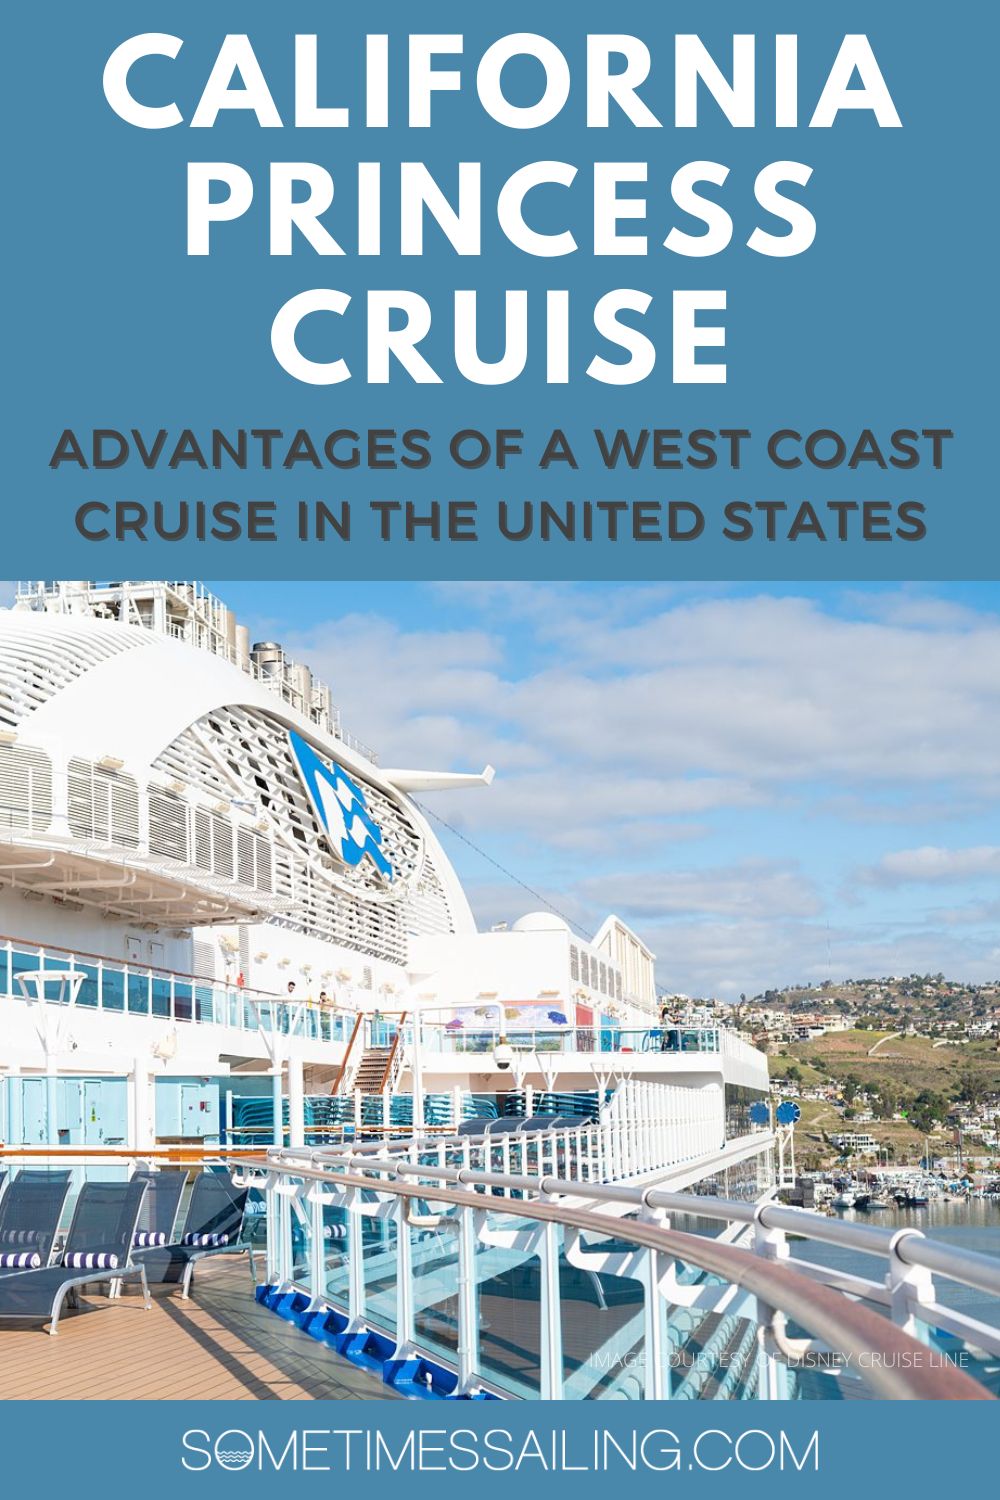 California Princess Cruise: Advantages of a West Coast Cruise in the United States, with a picture of the side Majestic Princess and the west coast in the background.